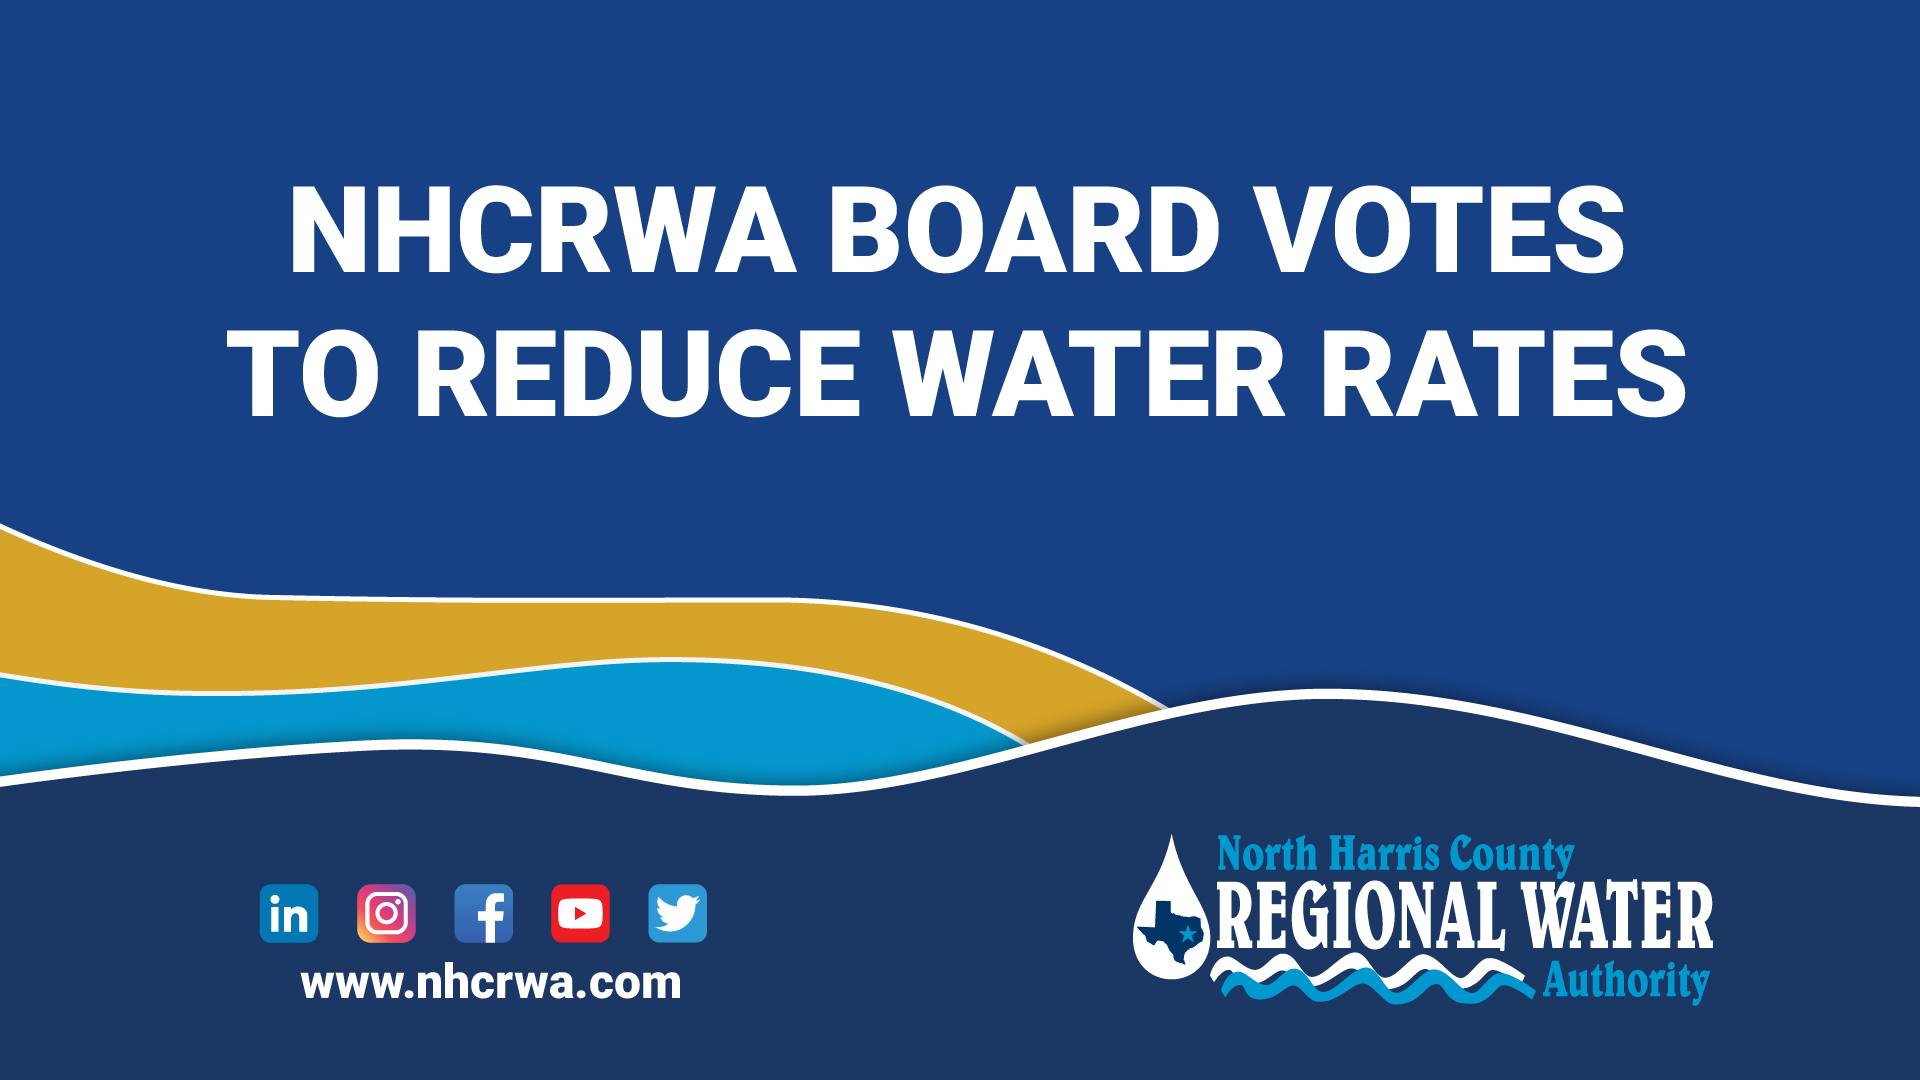 NHCRWA Board votes to reduce water rates